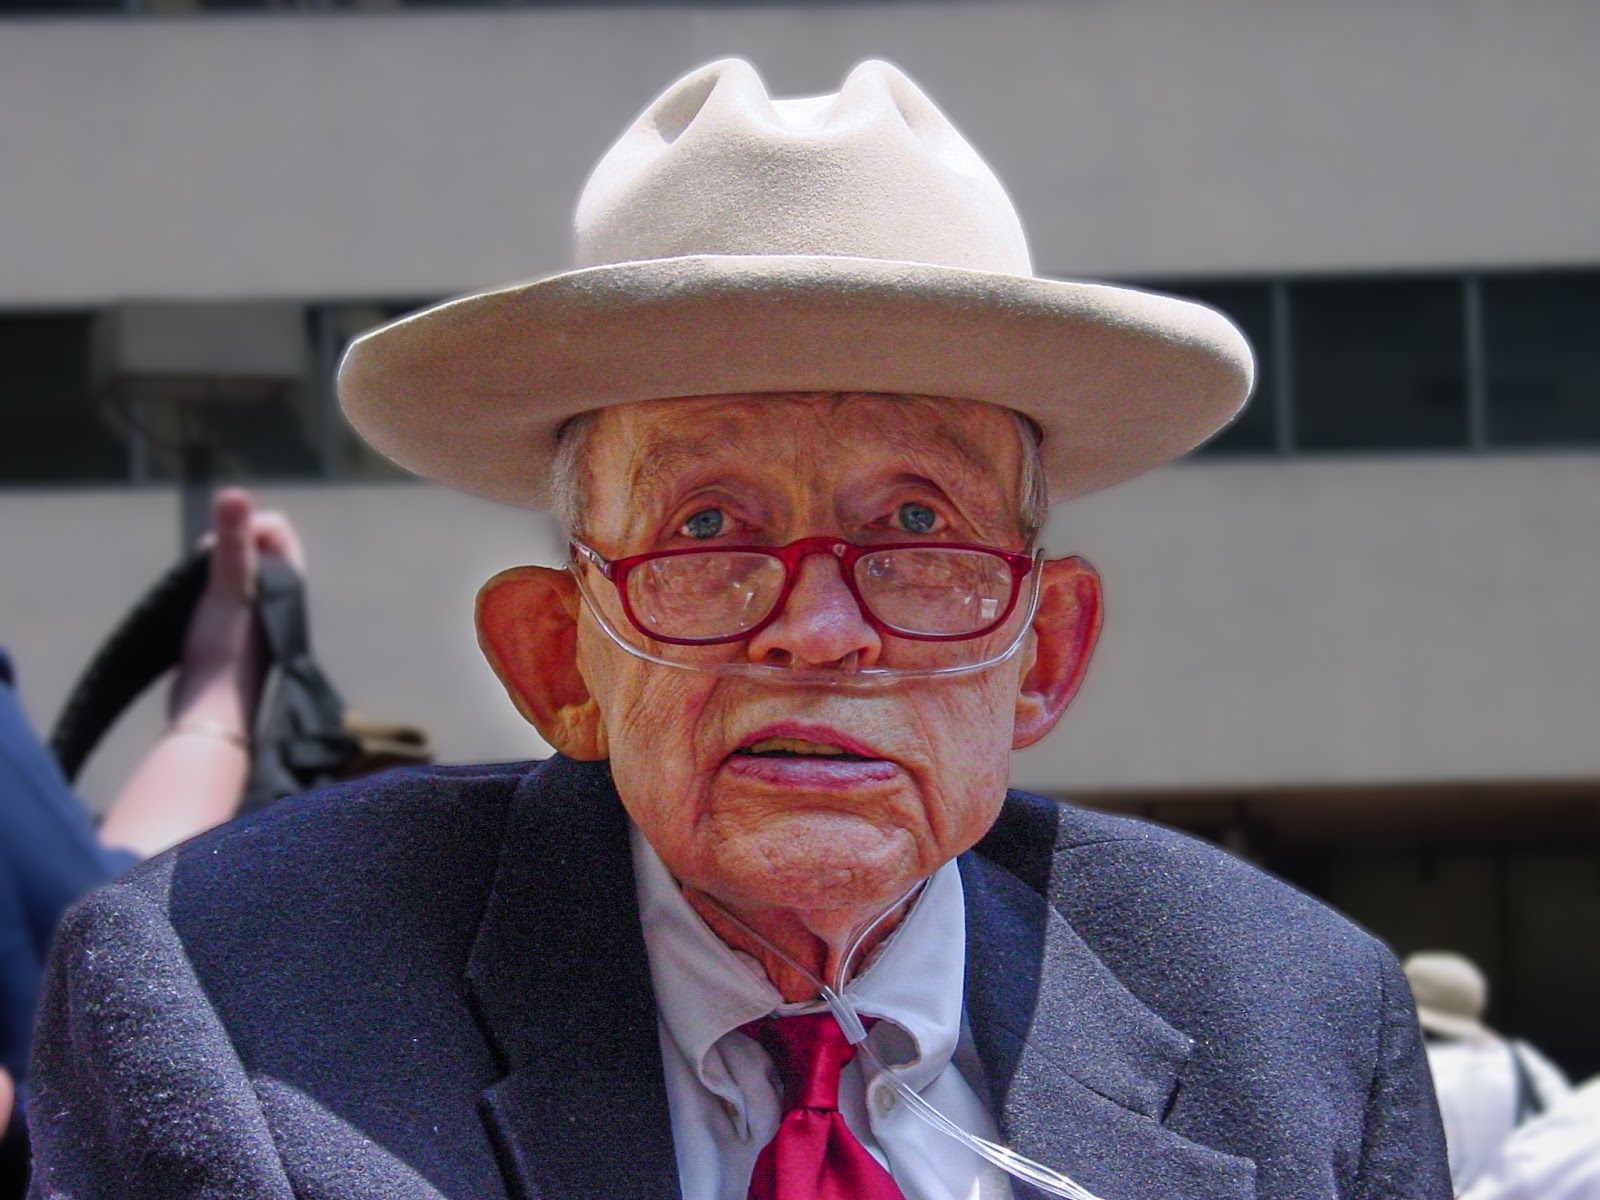 Man with sorrowful blue eyes looks over his red glasses is wearing a cowboy hat, blue suit and red tie. Oxygen tubes run into his nose.